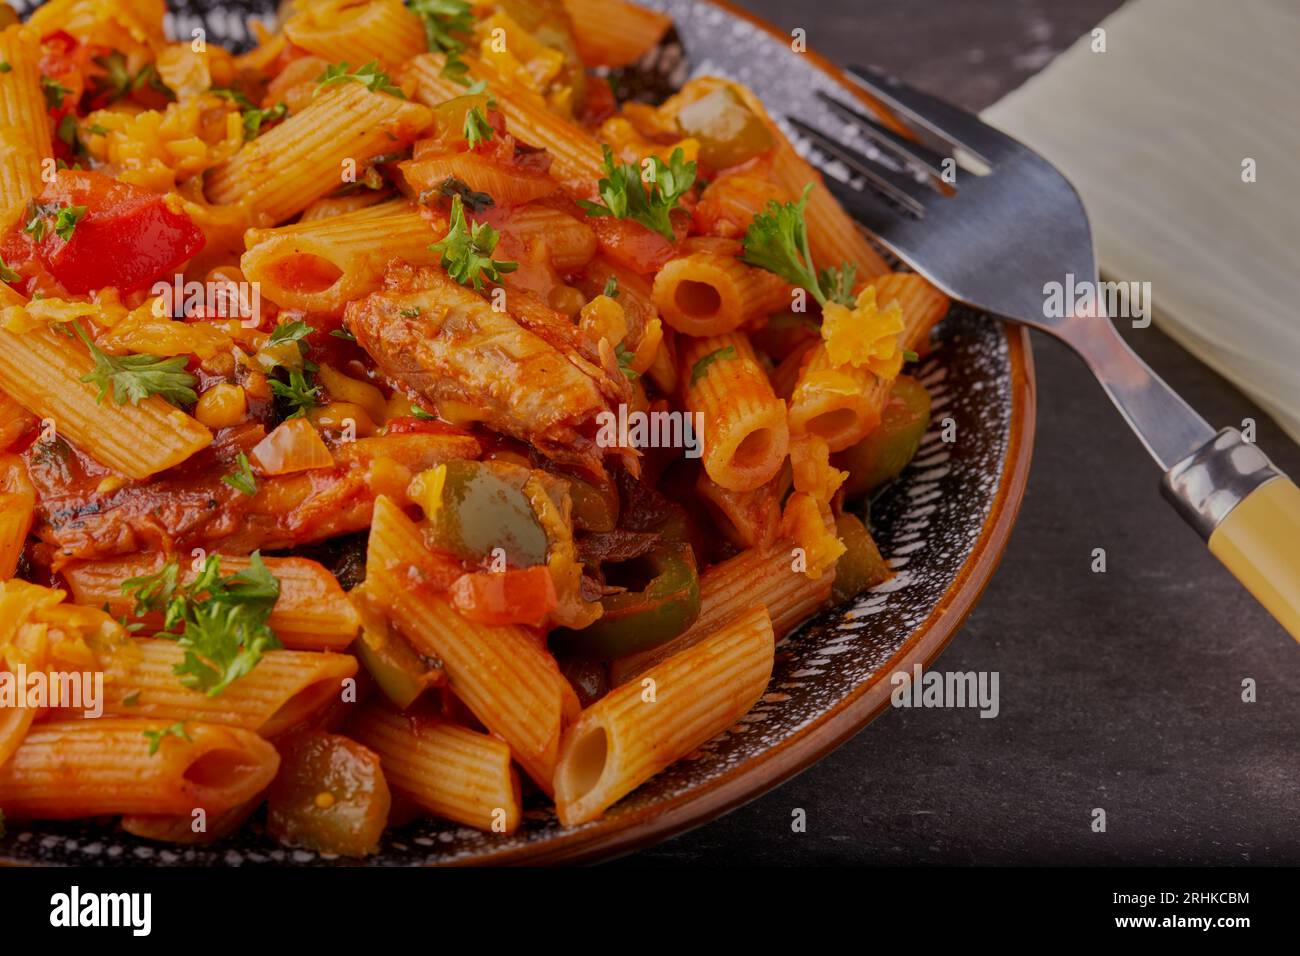 Sardines and pasta with vegetables and a tomato sauce, garnished with herbs. Stock Photo